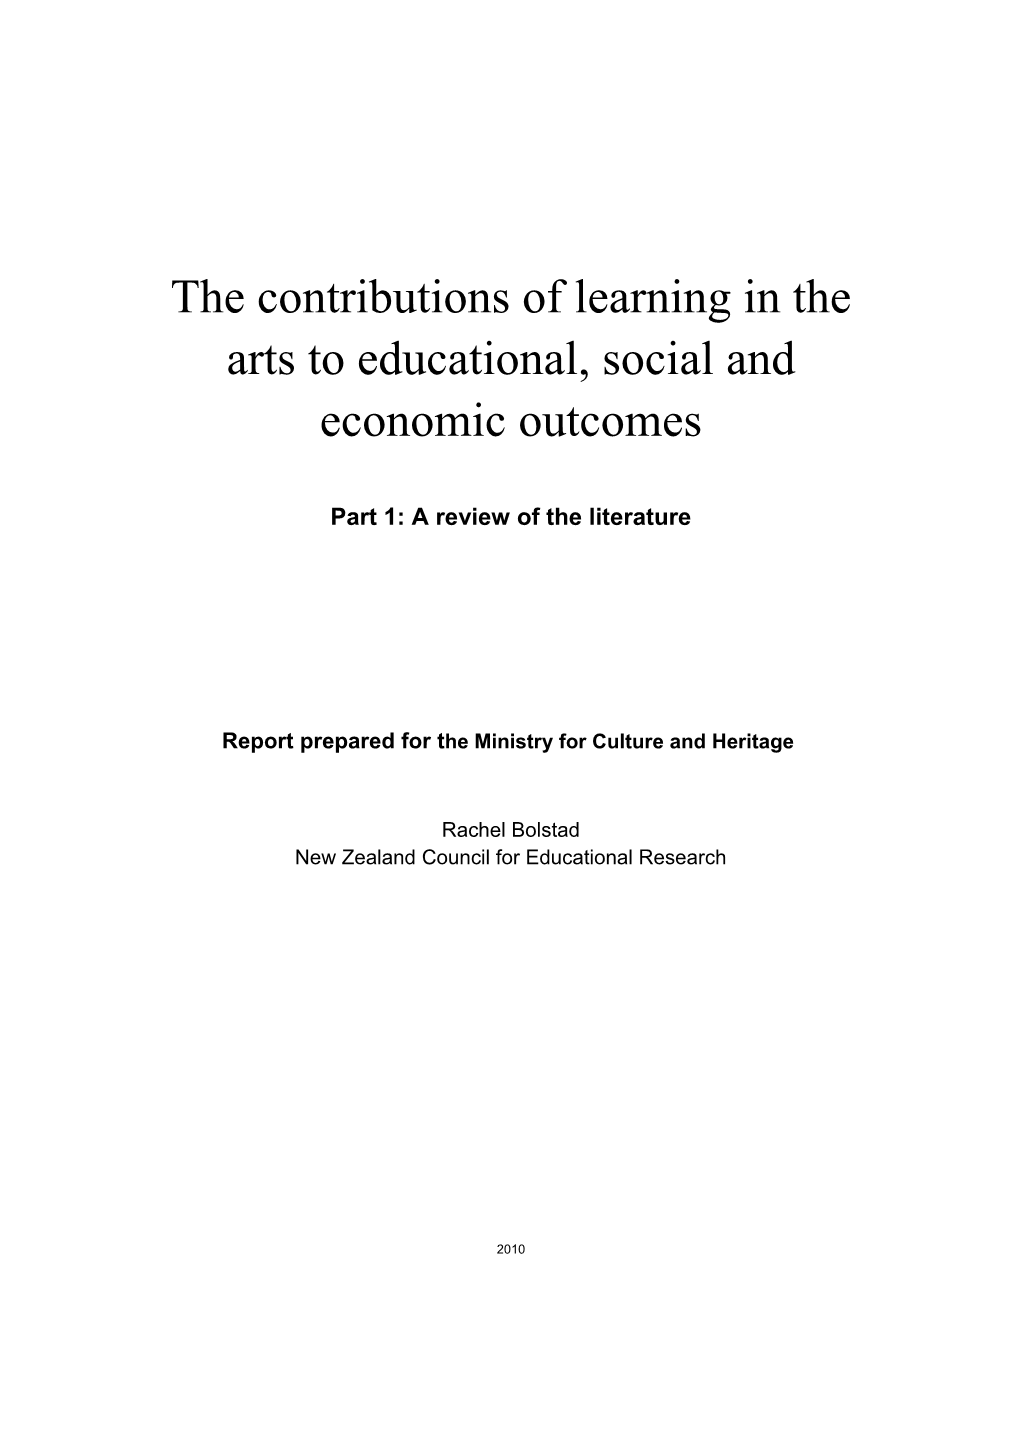 The Contributions of Learning in the Arts to Educational, Social, and Economic Outcomes